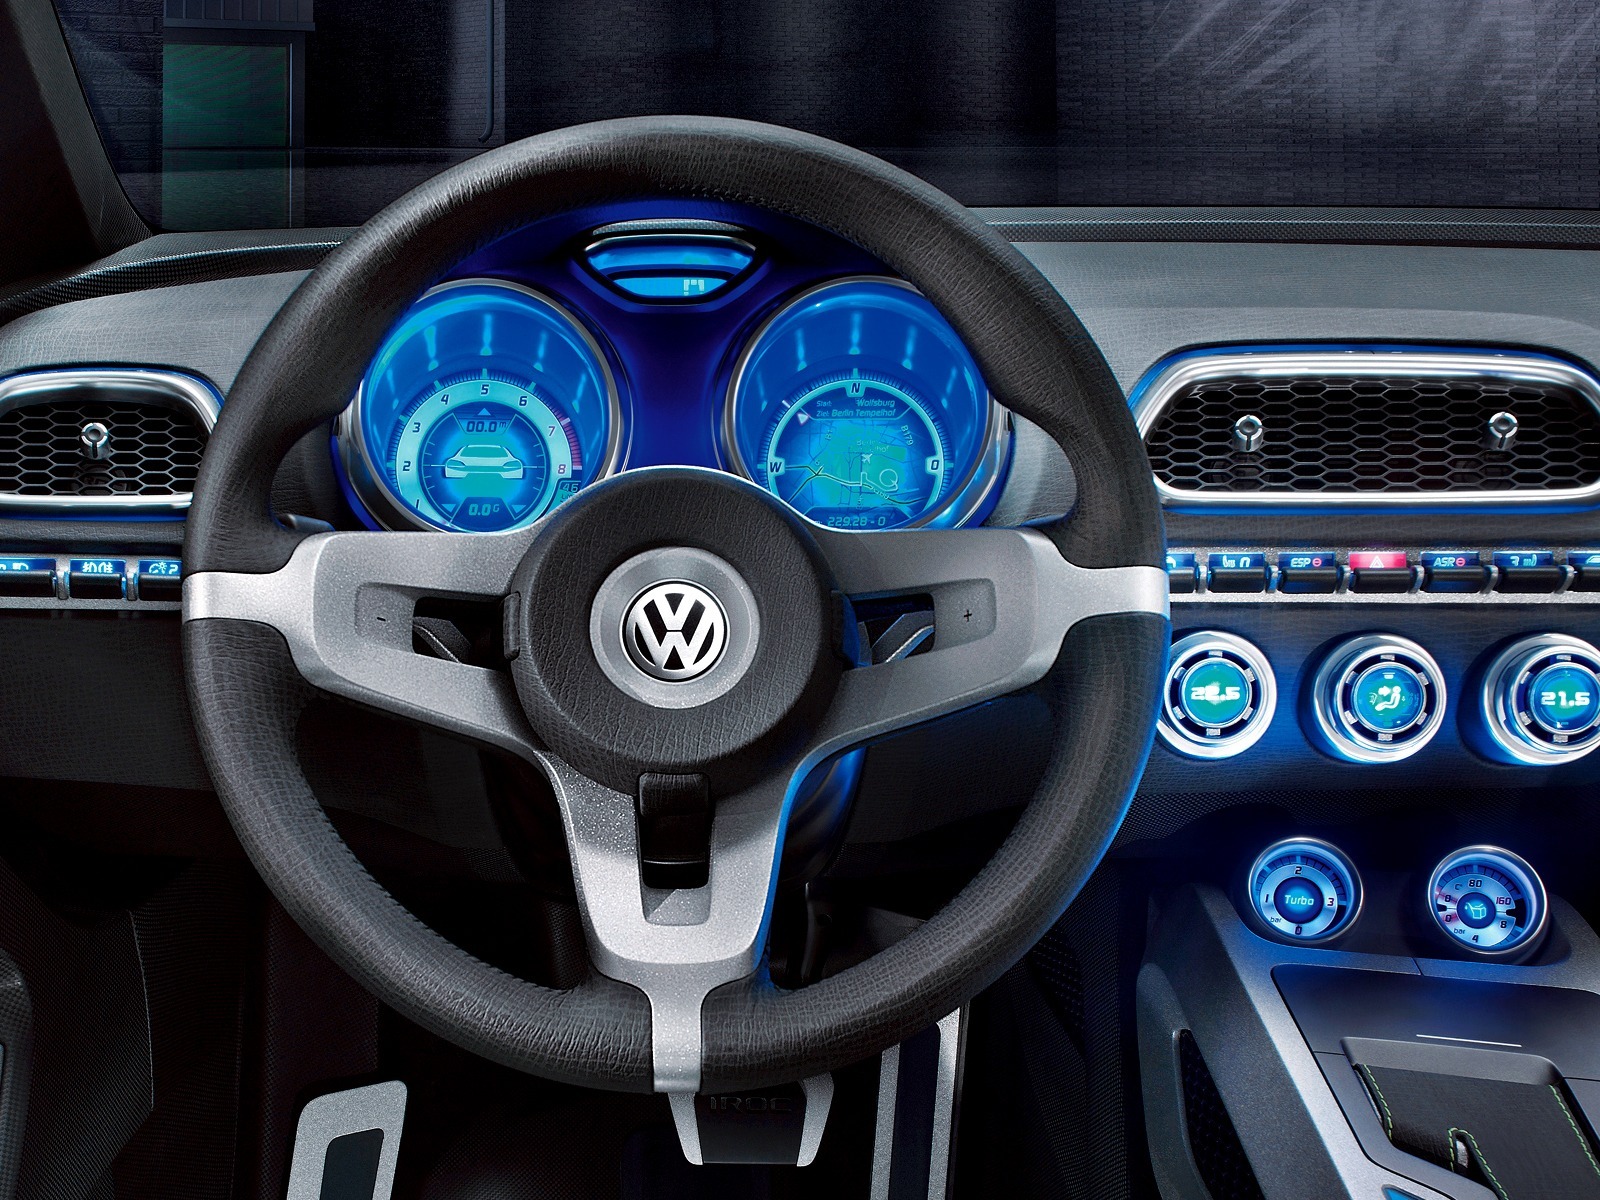 Volkswagen Concept Car tapety (2) #6 - 1600x1200